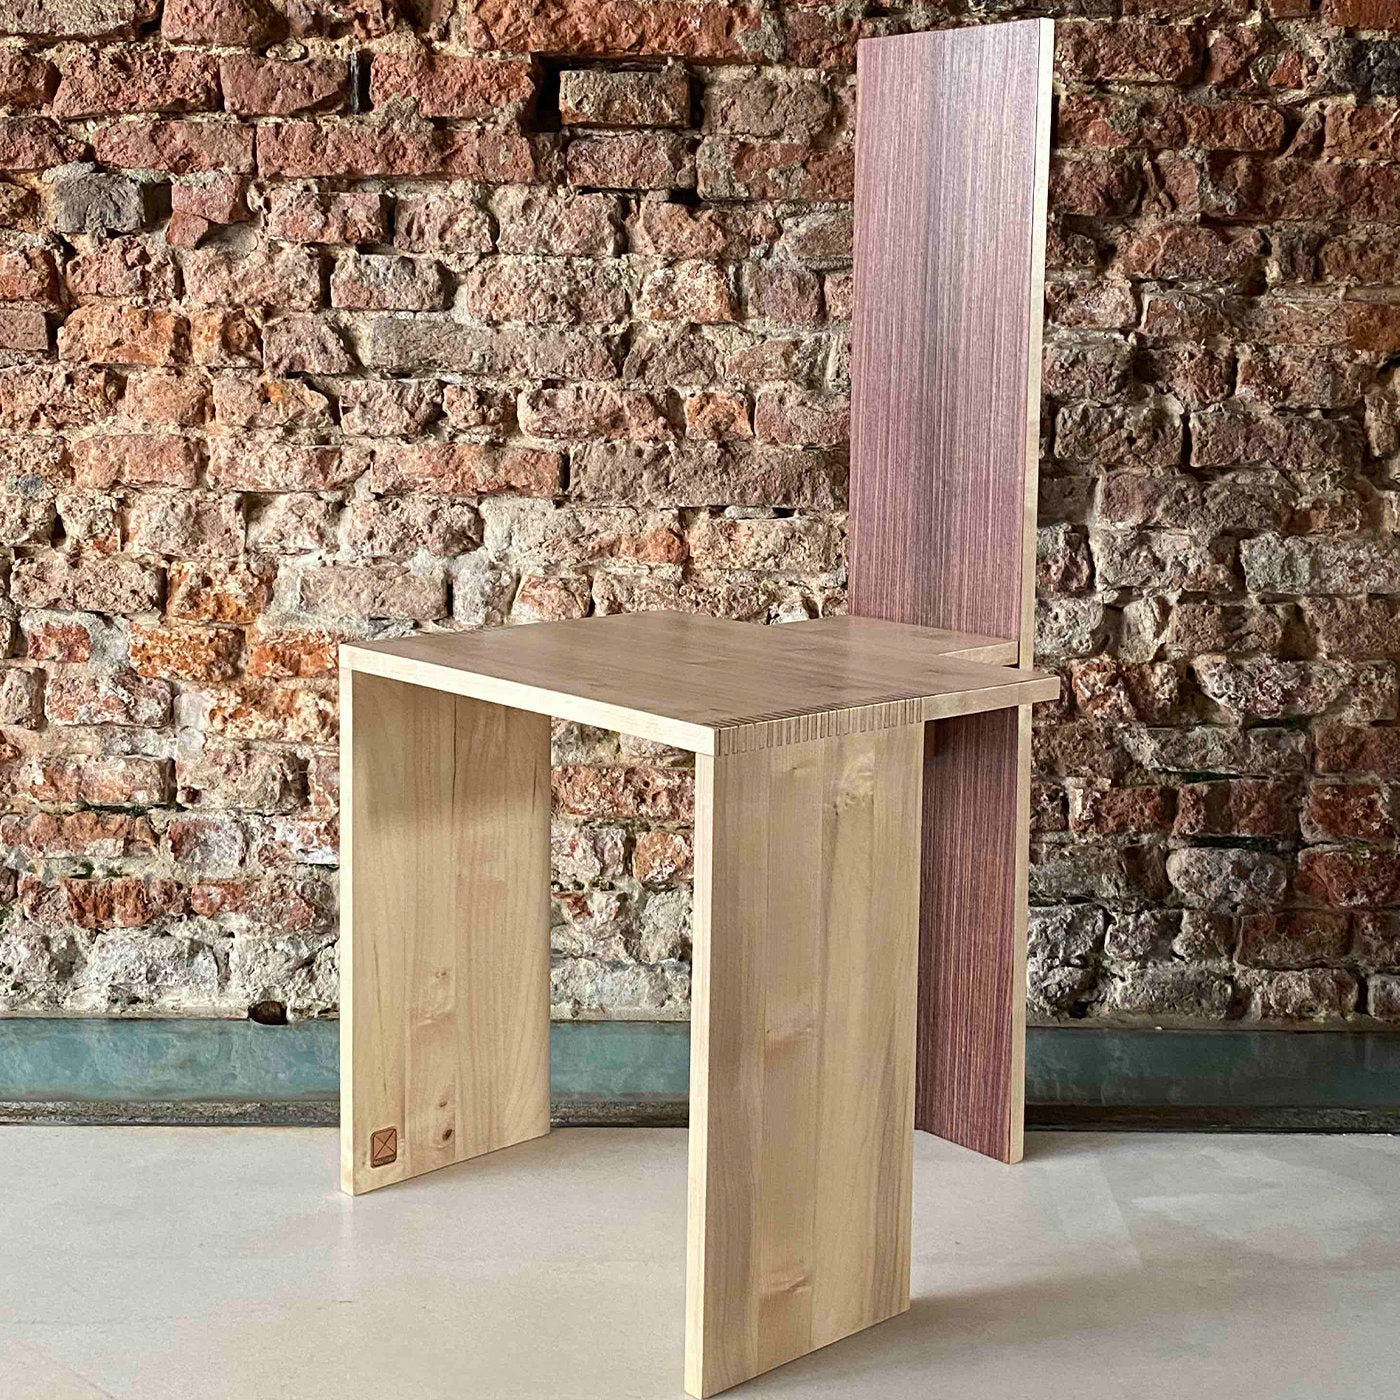 Cimabue Rosewood Chair Limited Edition by Ferdinando Meccani - Alternative view 5